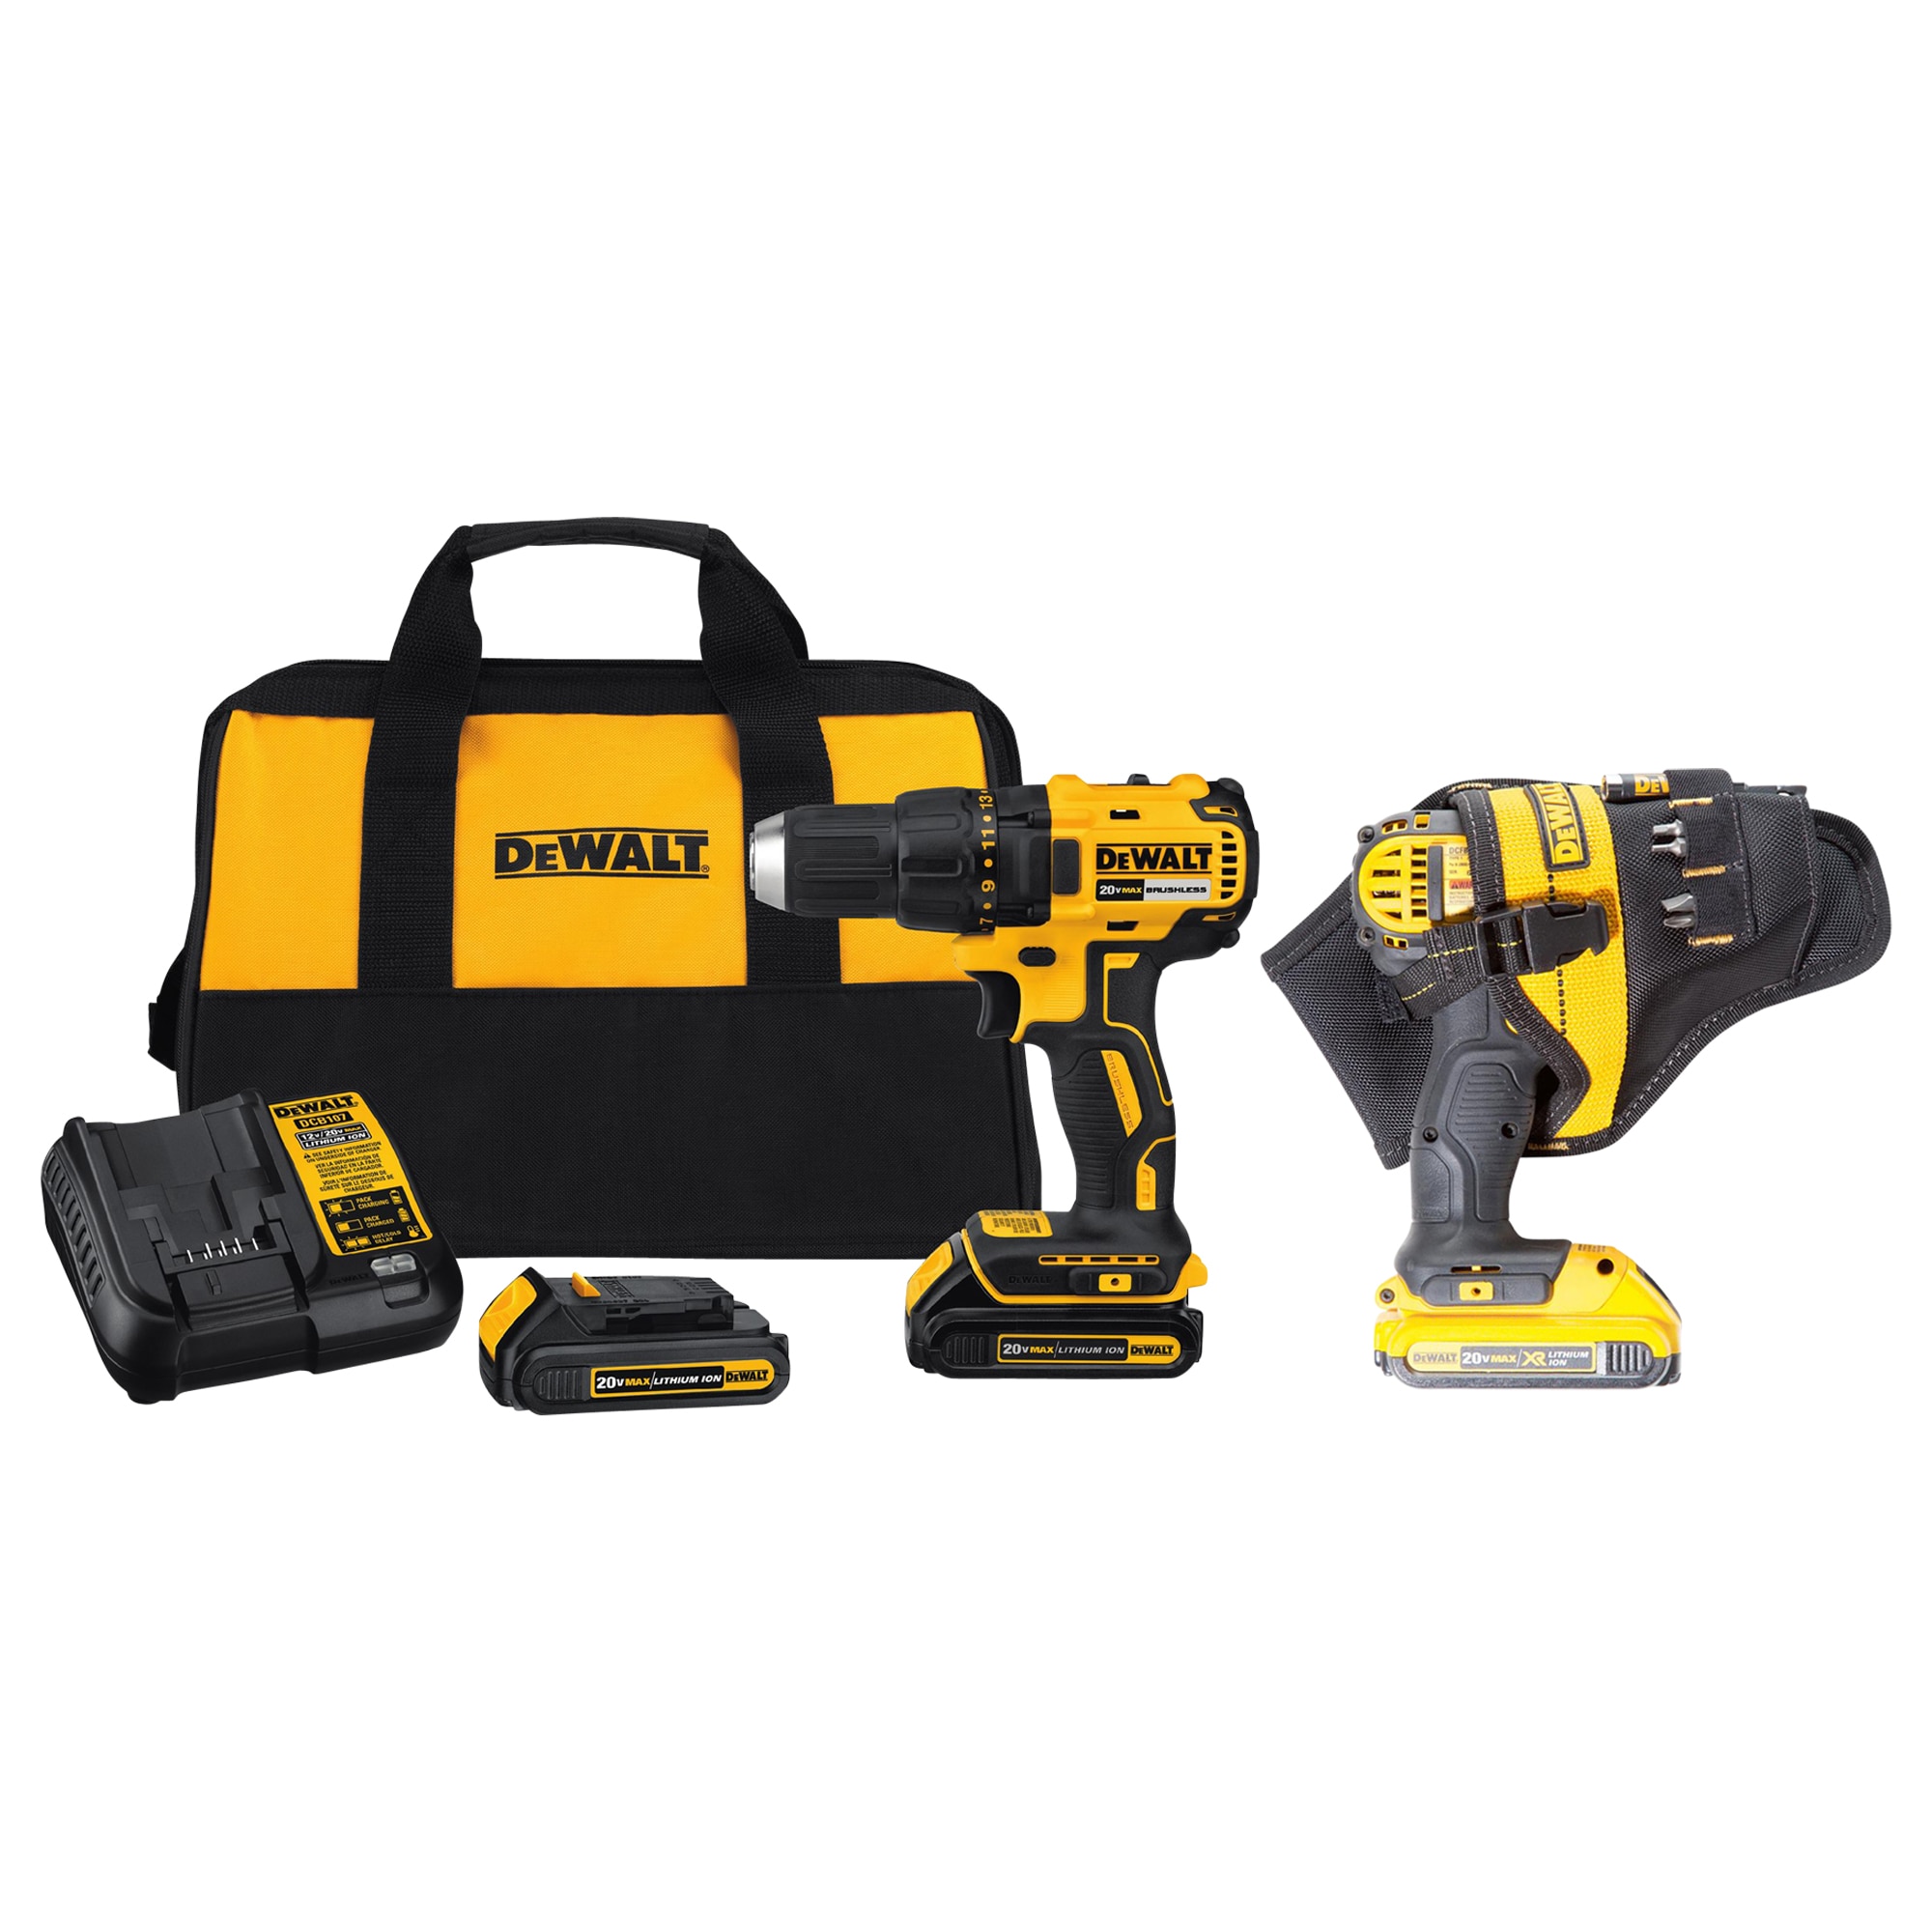 DEWALT 20-volt Max 1/2-in Brushless Cordless Drill (2-Batteries Included and Charger Included) & Polyester Drill Holder